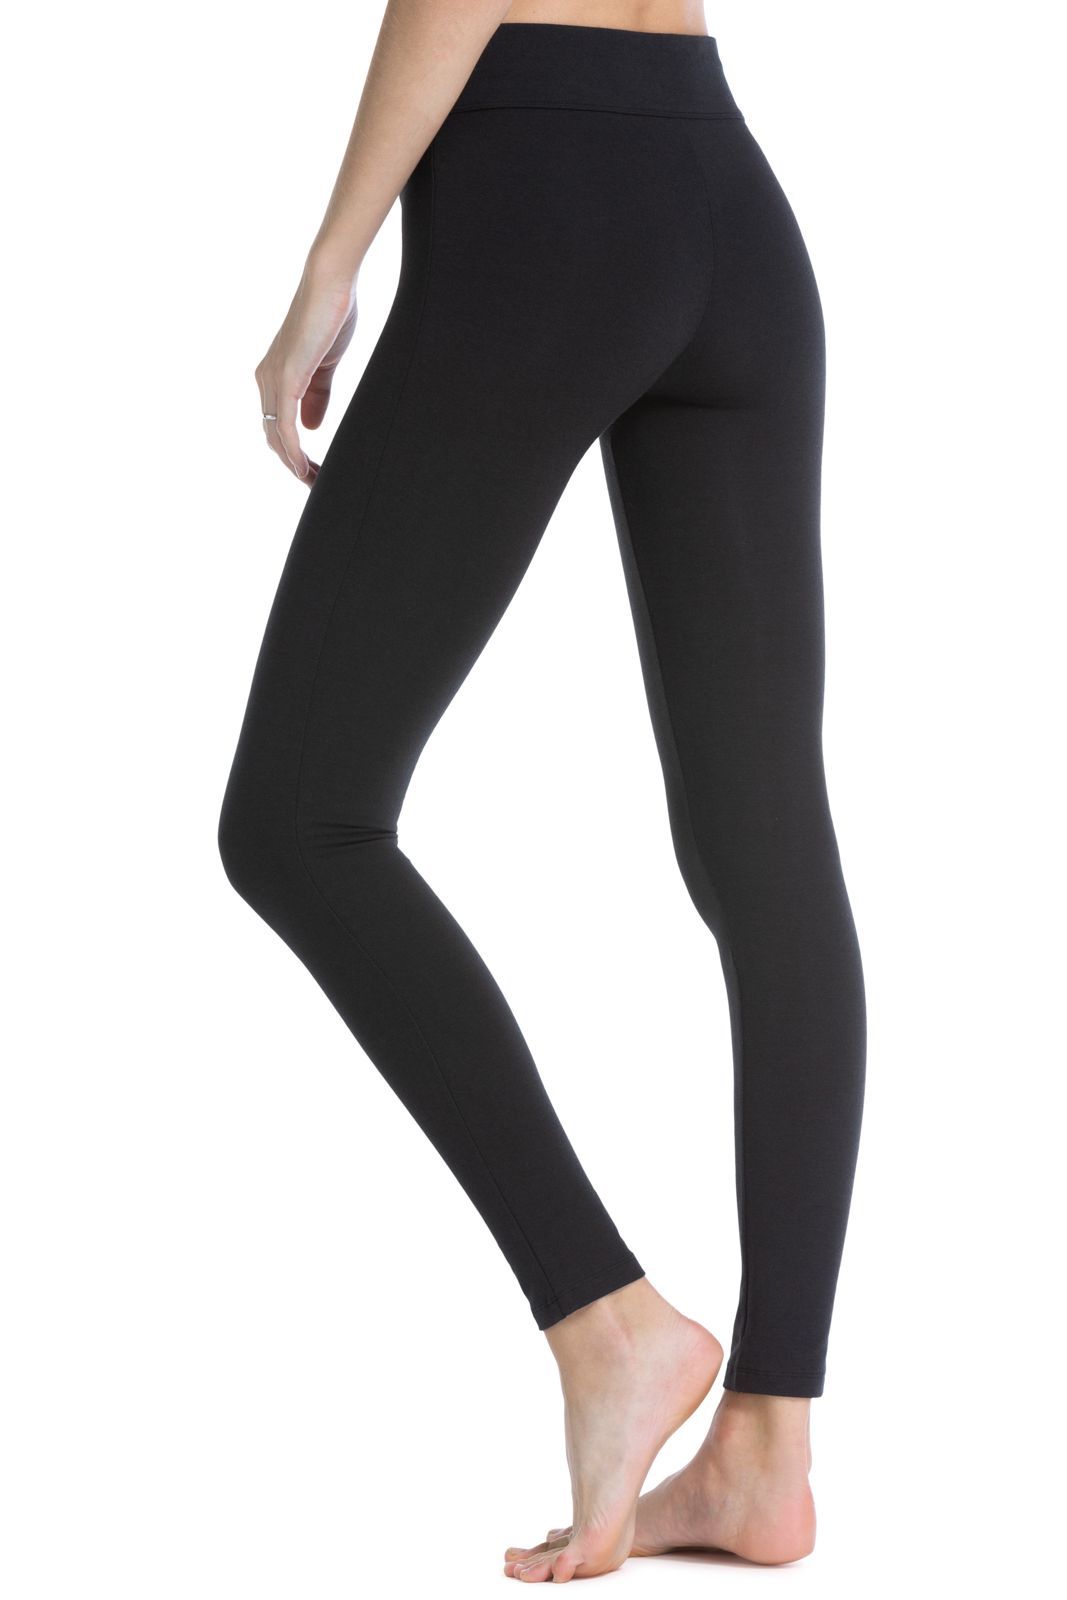 Buy Comfort Lady Women's Ankle Length Leggings (Black, Brown, Green_Free  Size) Pack of 3 at